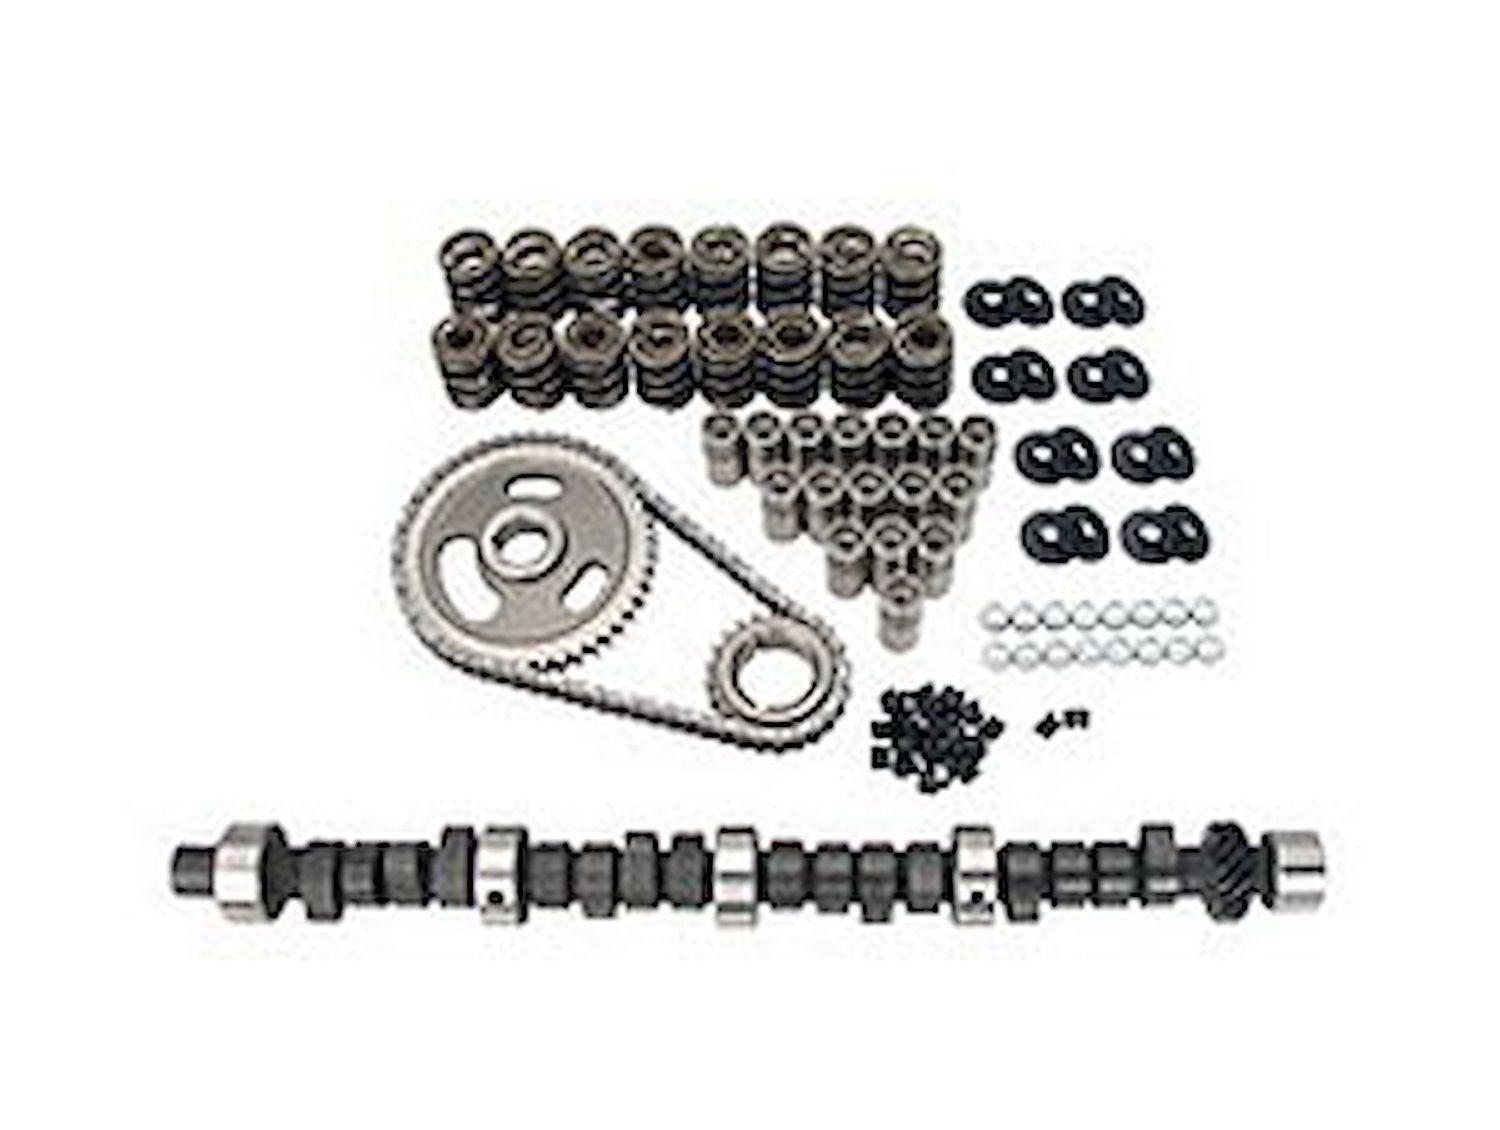 Mutha" Thumpr Thumpr Hydraulic Flat Tappet Camshaft Complete Kit Lift .497"/.483" Duration 287/304 RPM Range 2200 to 6100